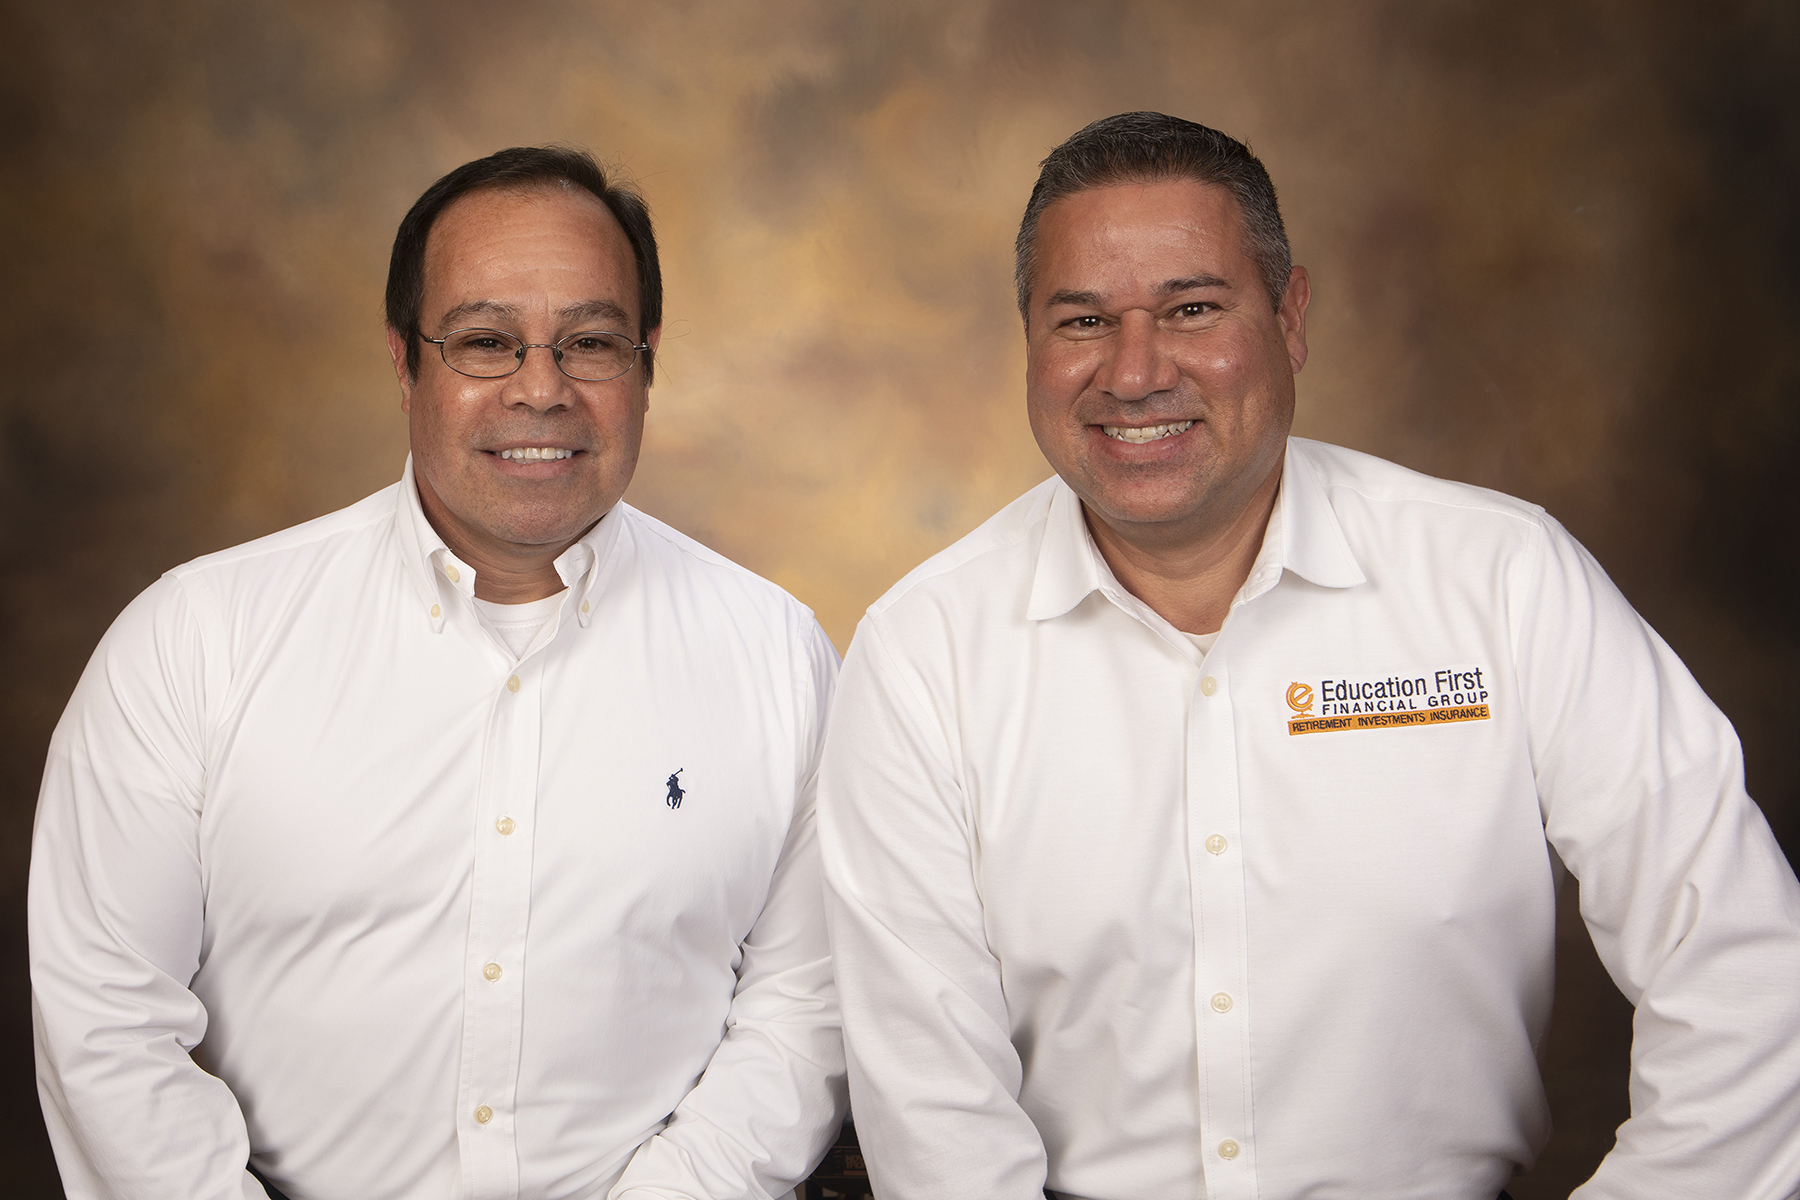 Art Perez and Sal Guerrero, advisors at Education First Financial Group